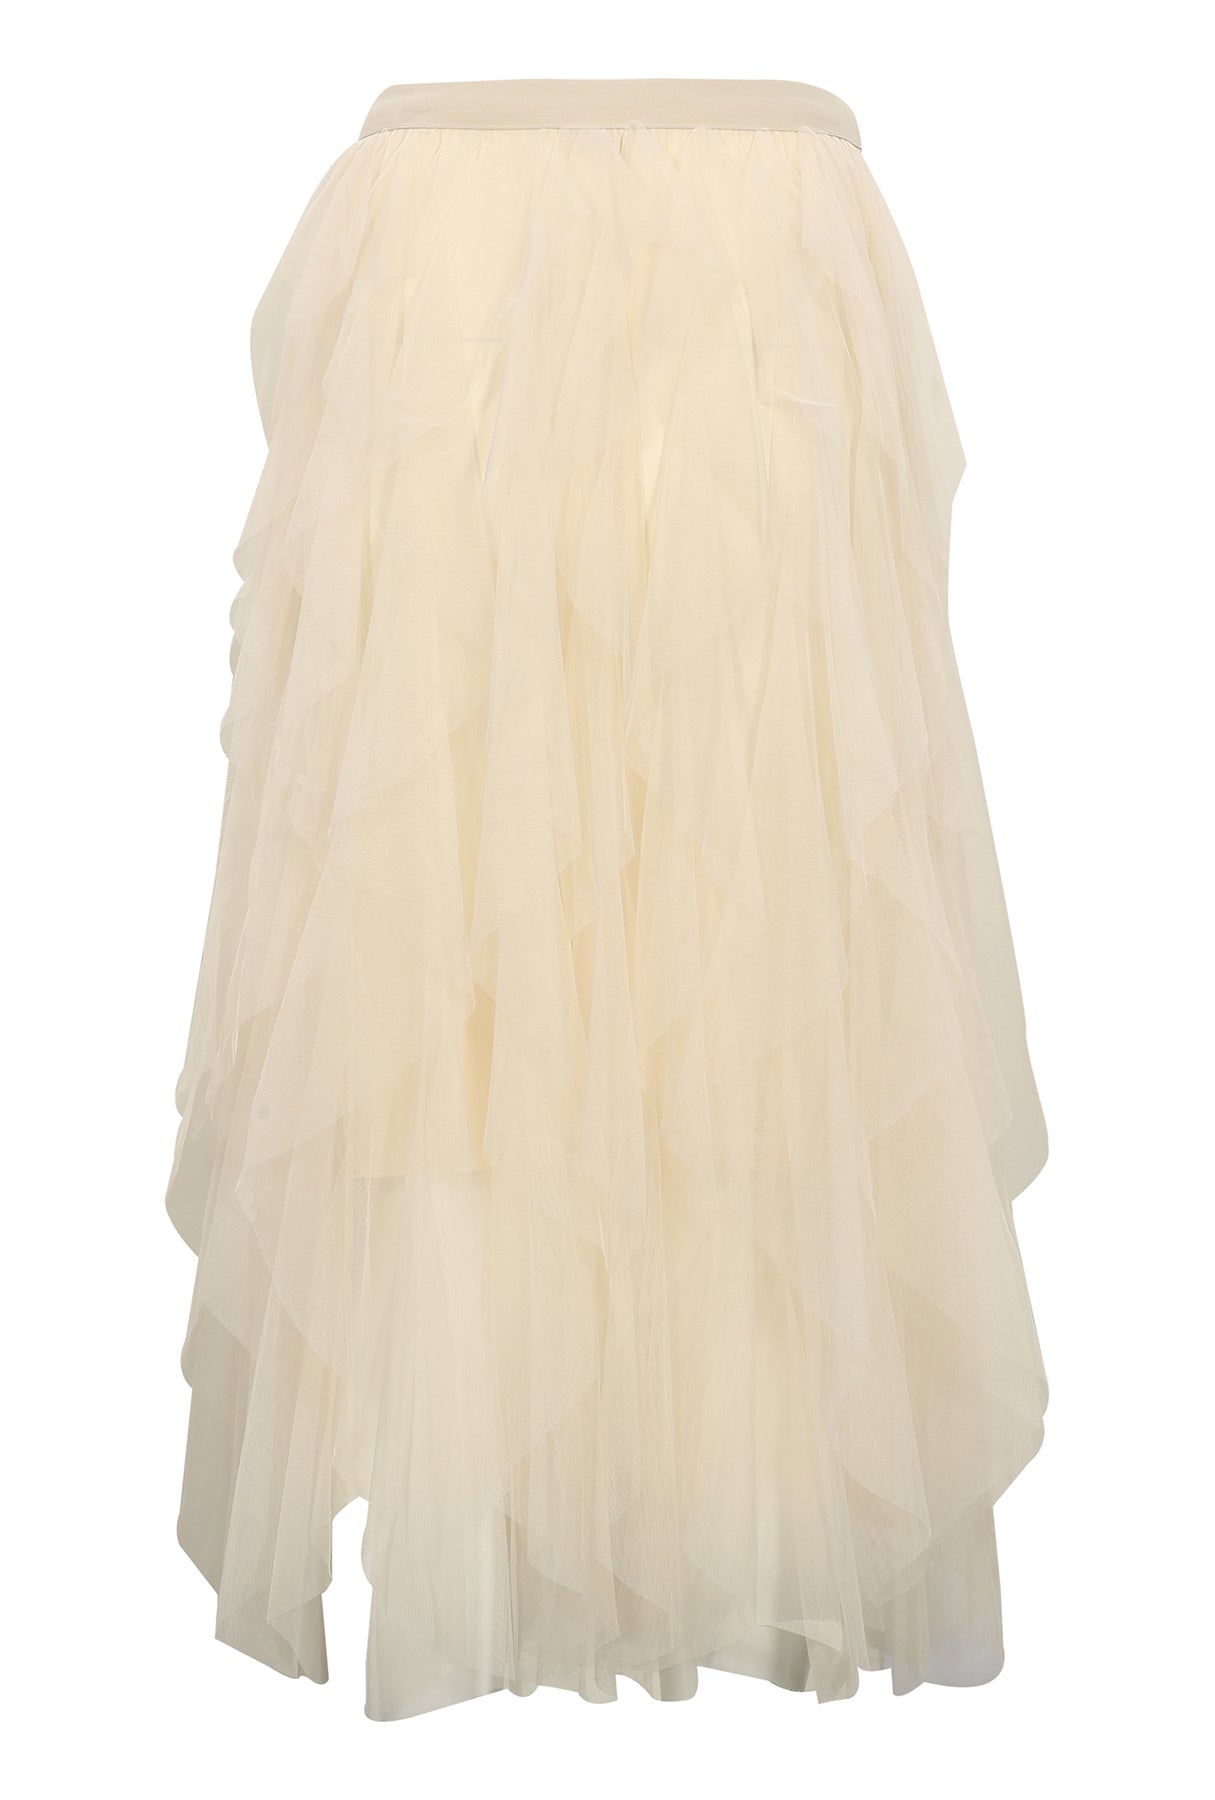 Get Carried Away Skirt - Ivory – Palm Bee